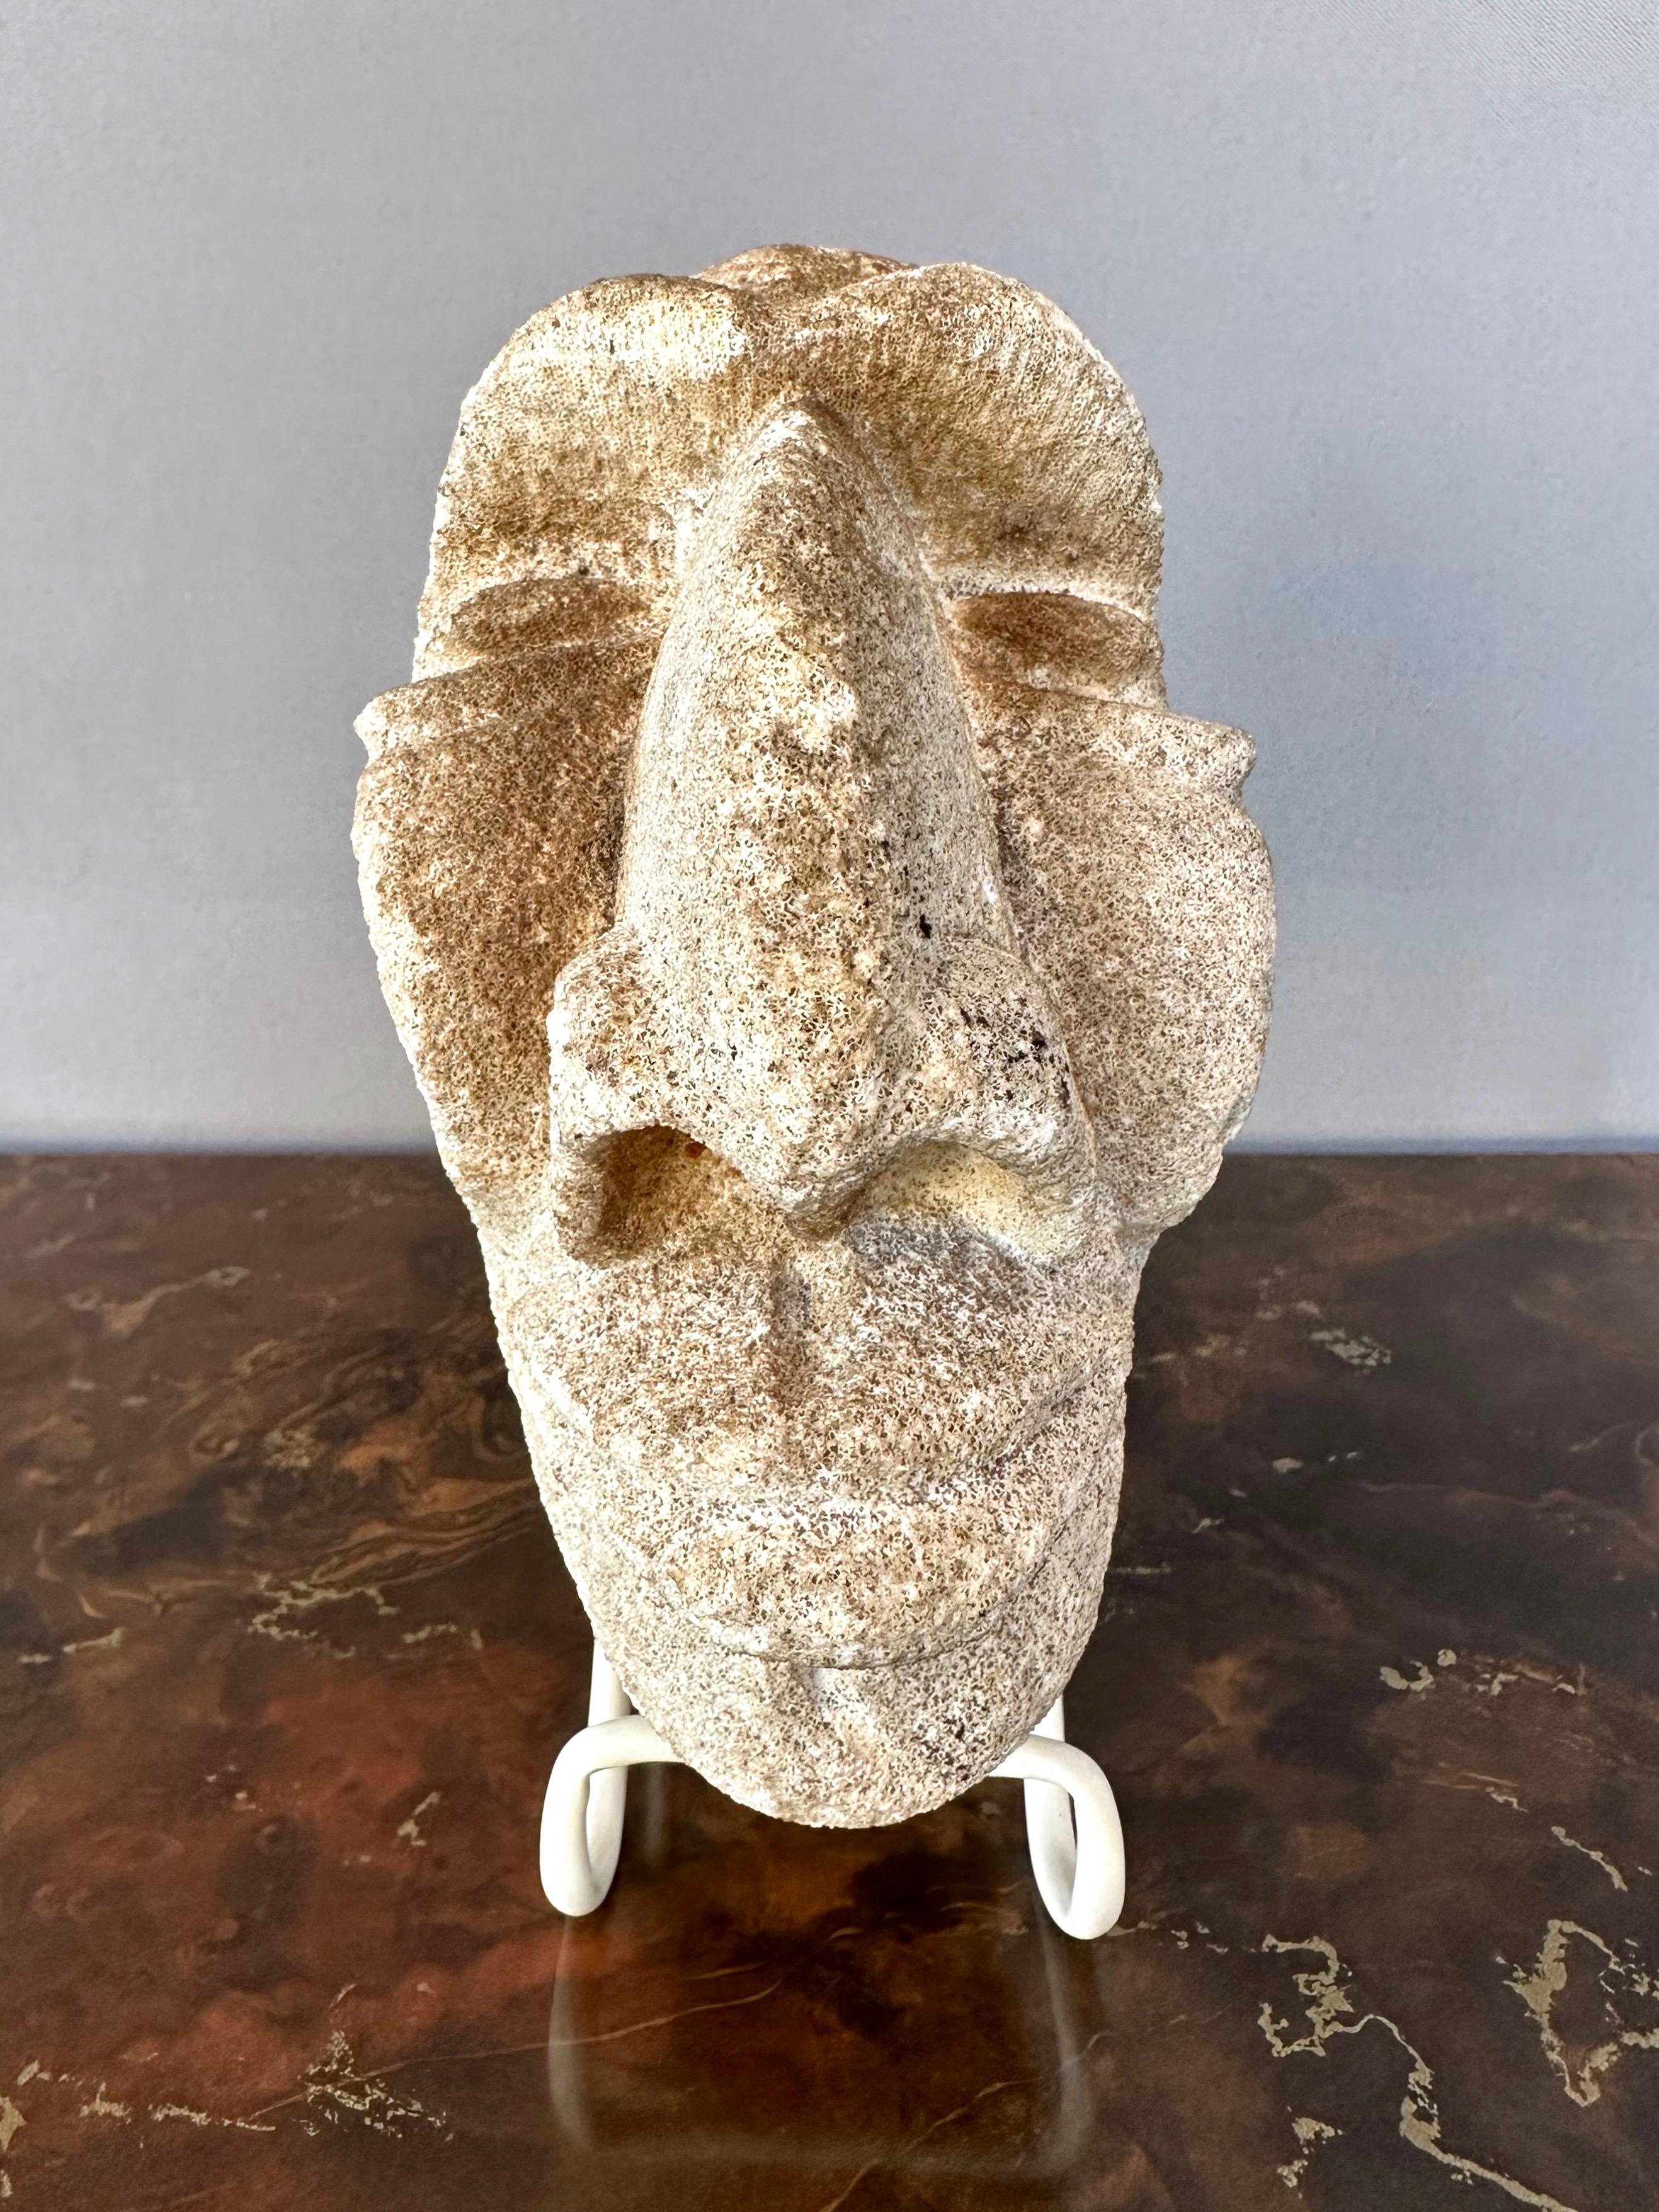 Primitive Antique Oceania White Carved Coral Ancestor’s Head #824, 19th Century